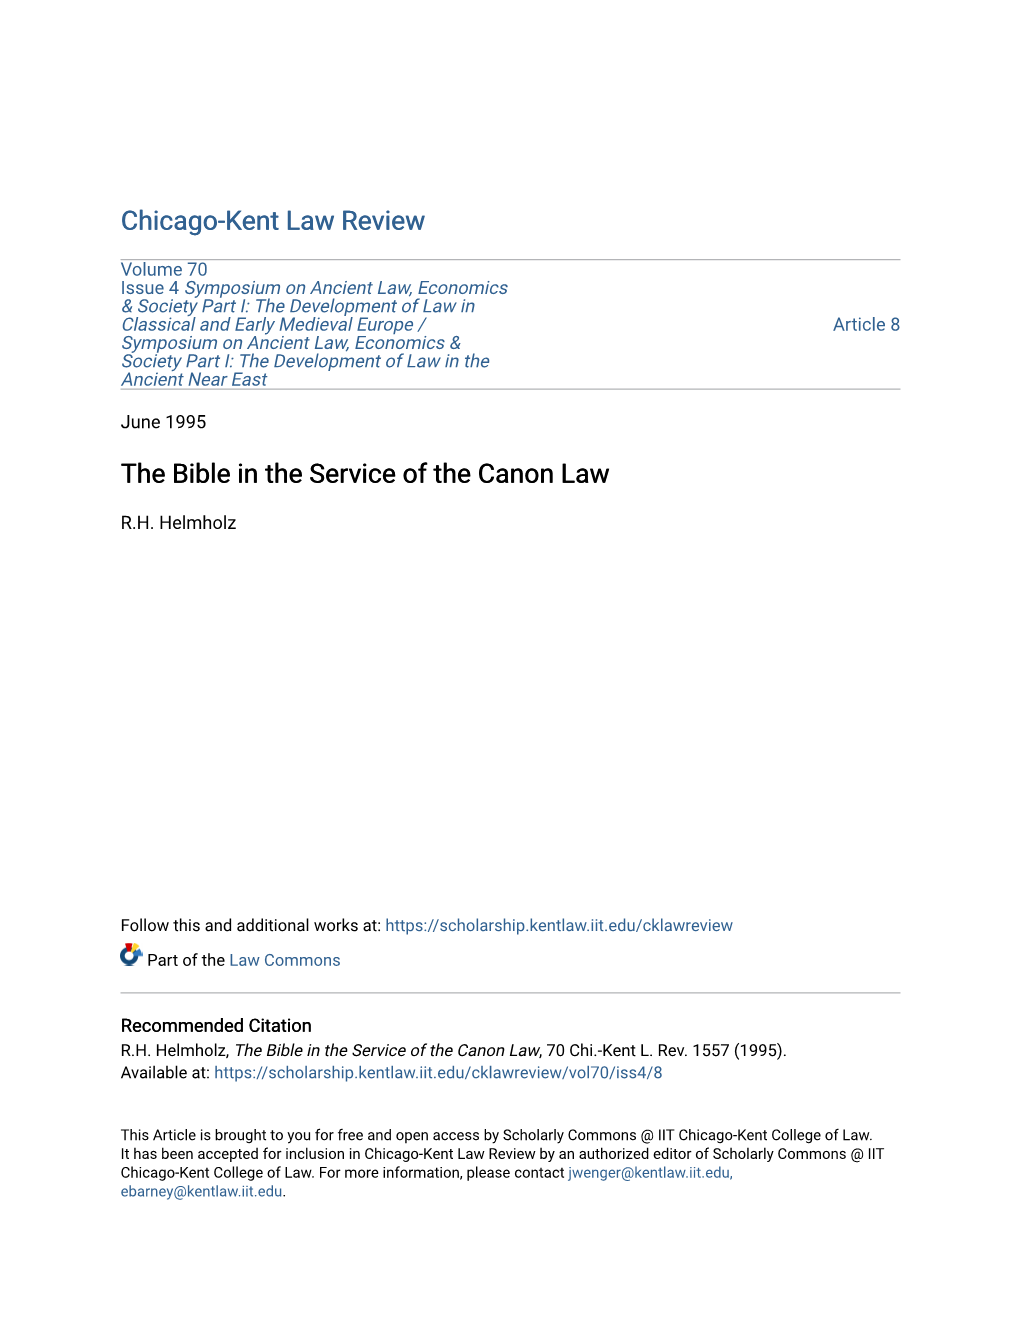 The Bible in the Service of the Canon Law